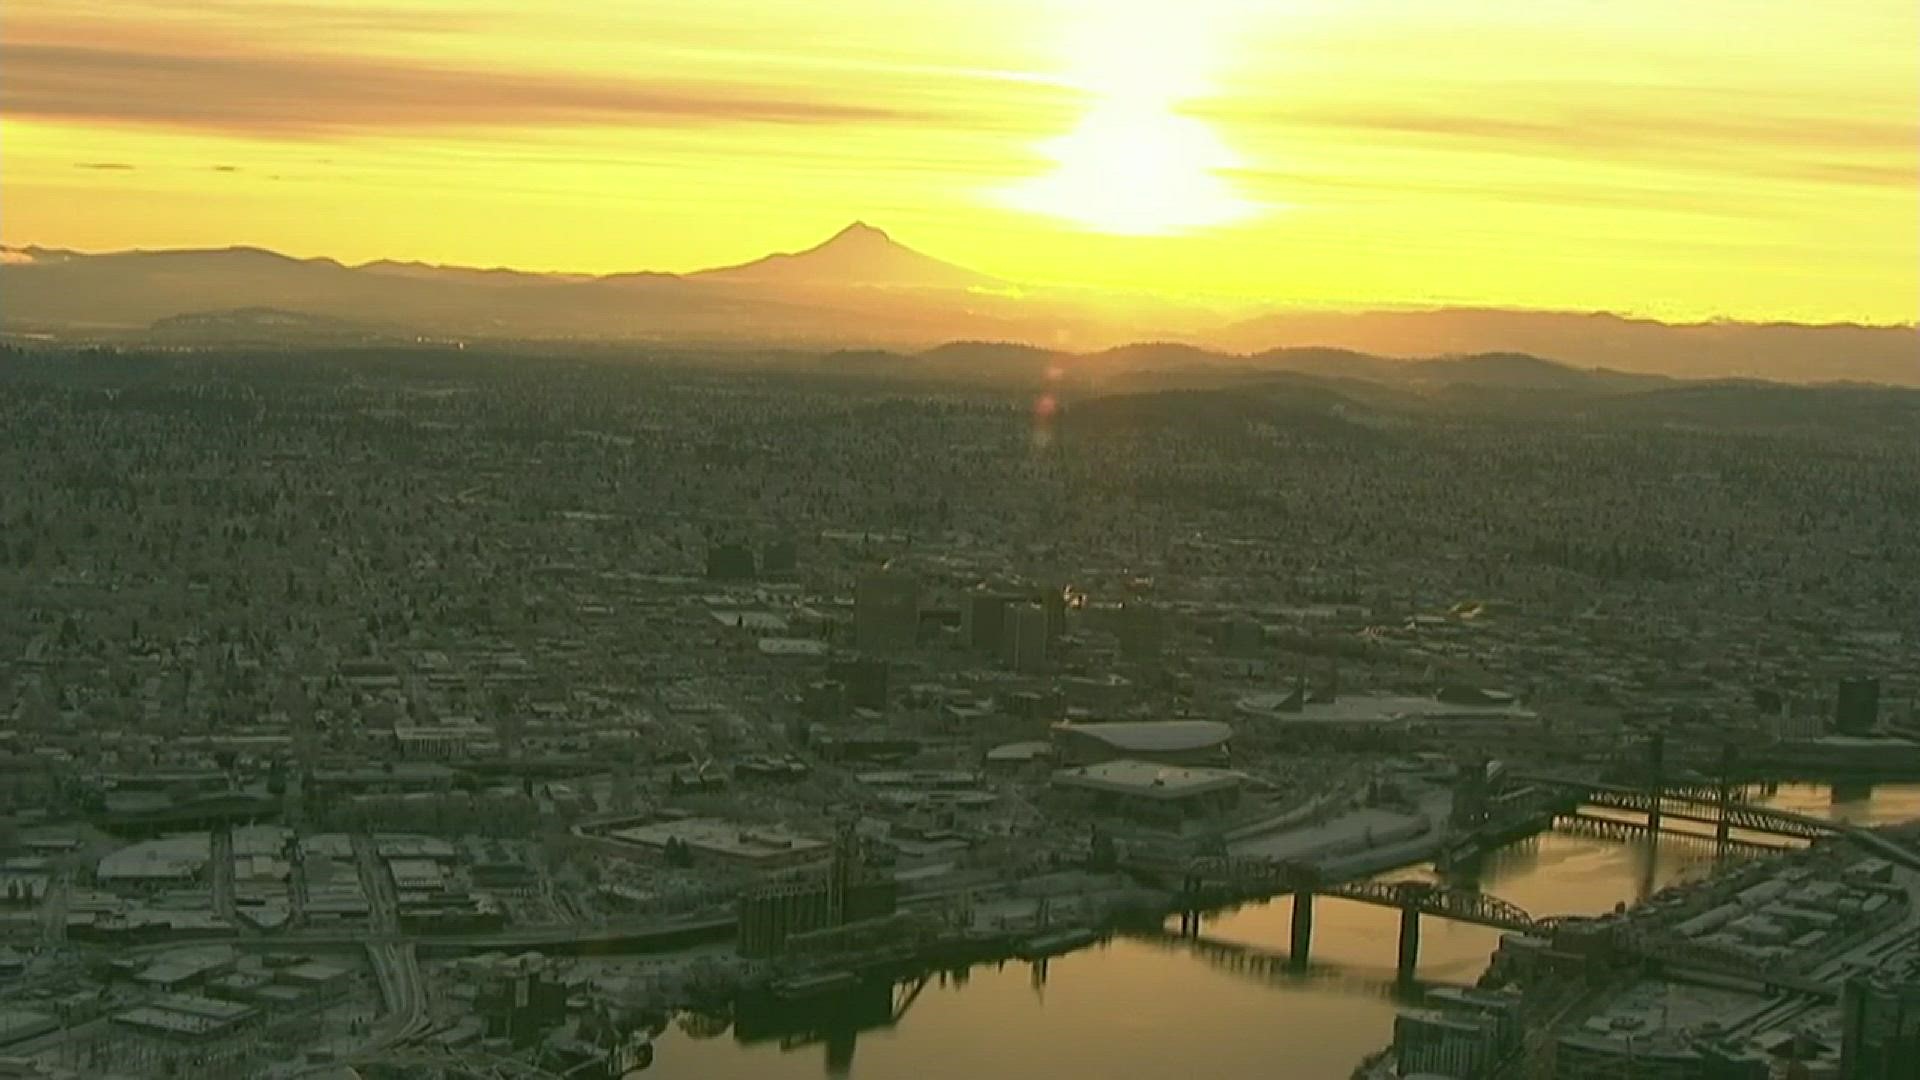 A look at some of the sights Sky 8 saw over a snowy Portland on Wednesday morning